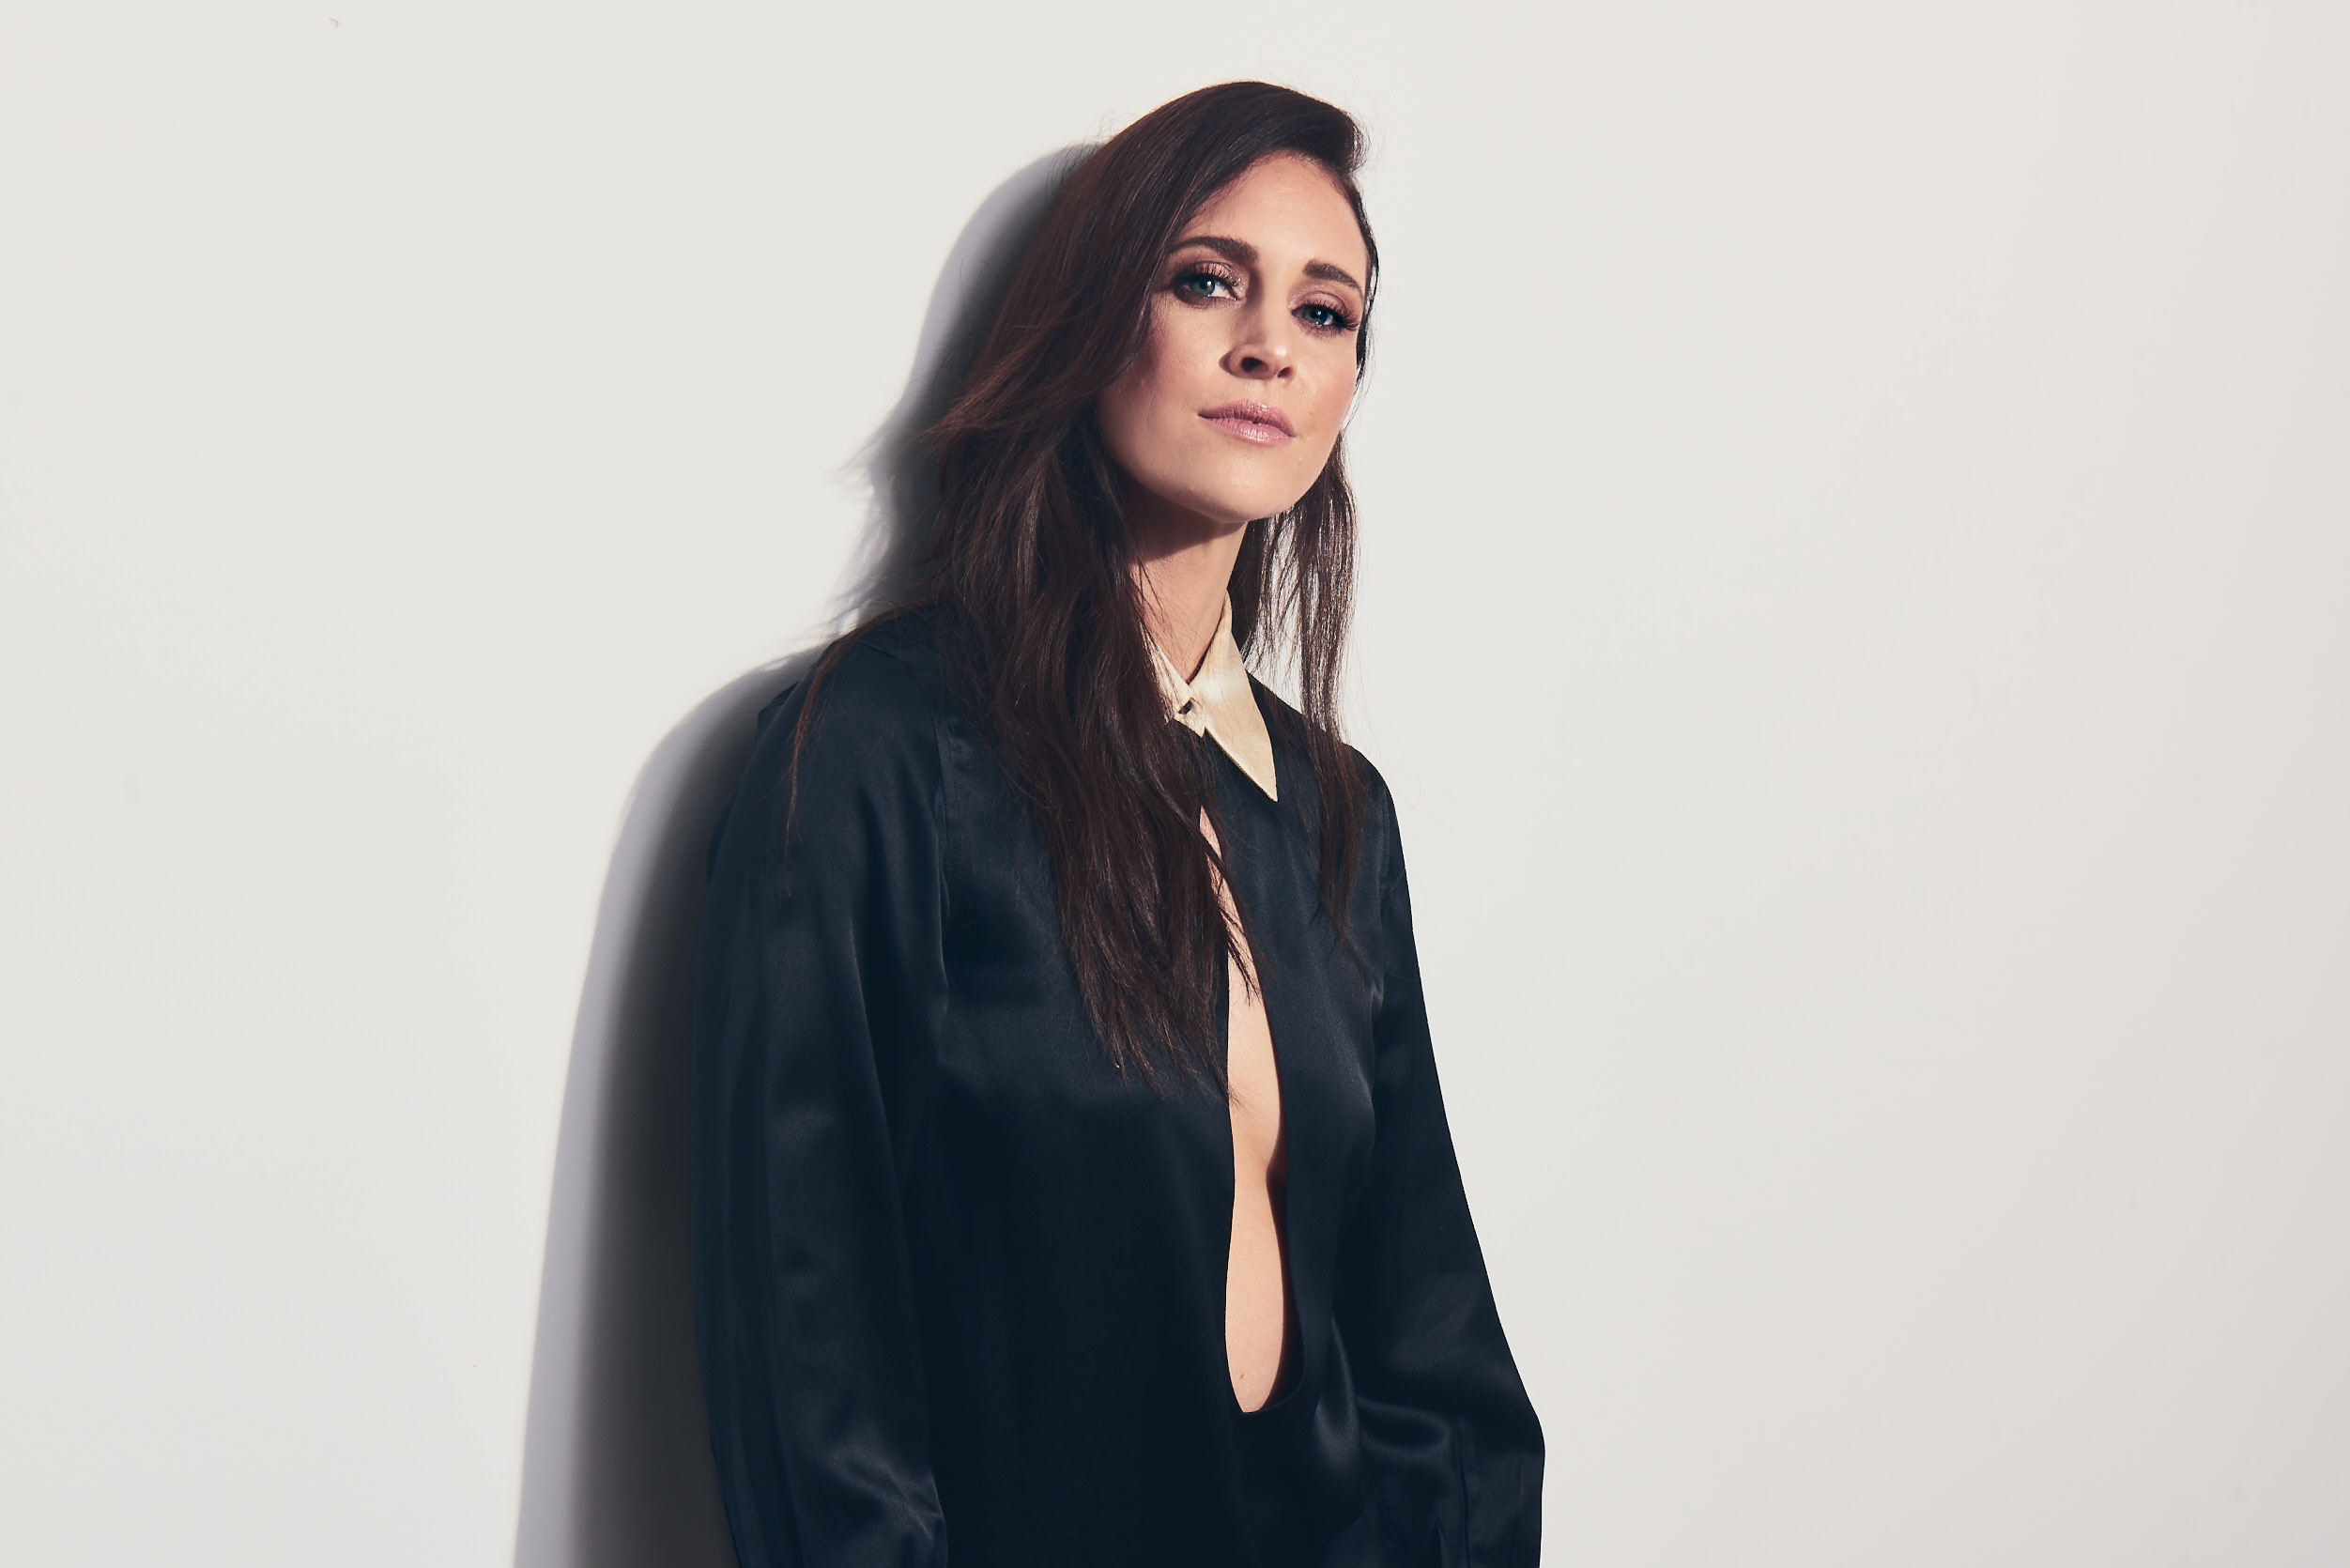 Kelleigh Bannen on Why It’s Important to Have Her Music Shine A Light on Other Women